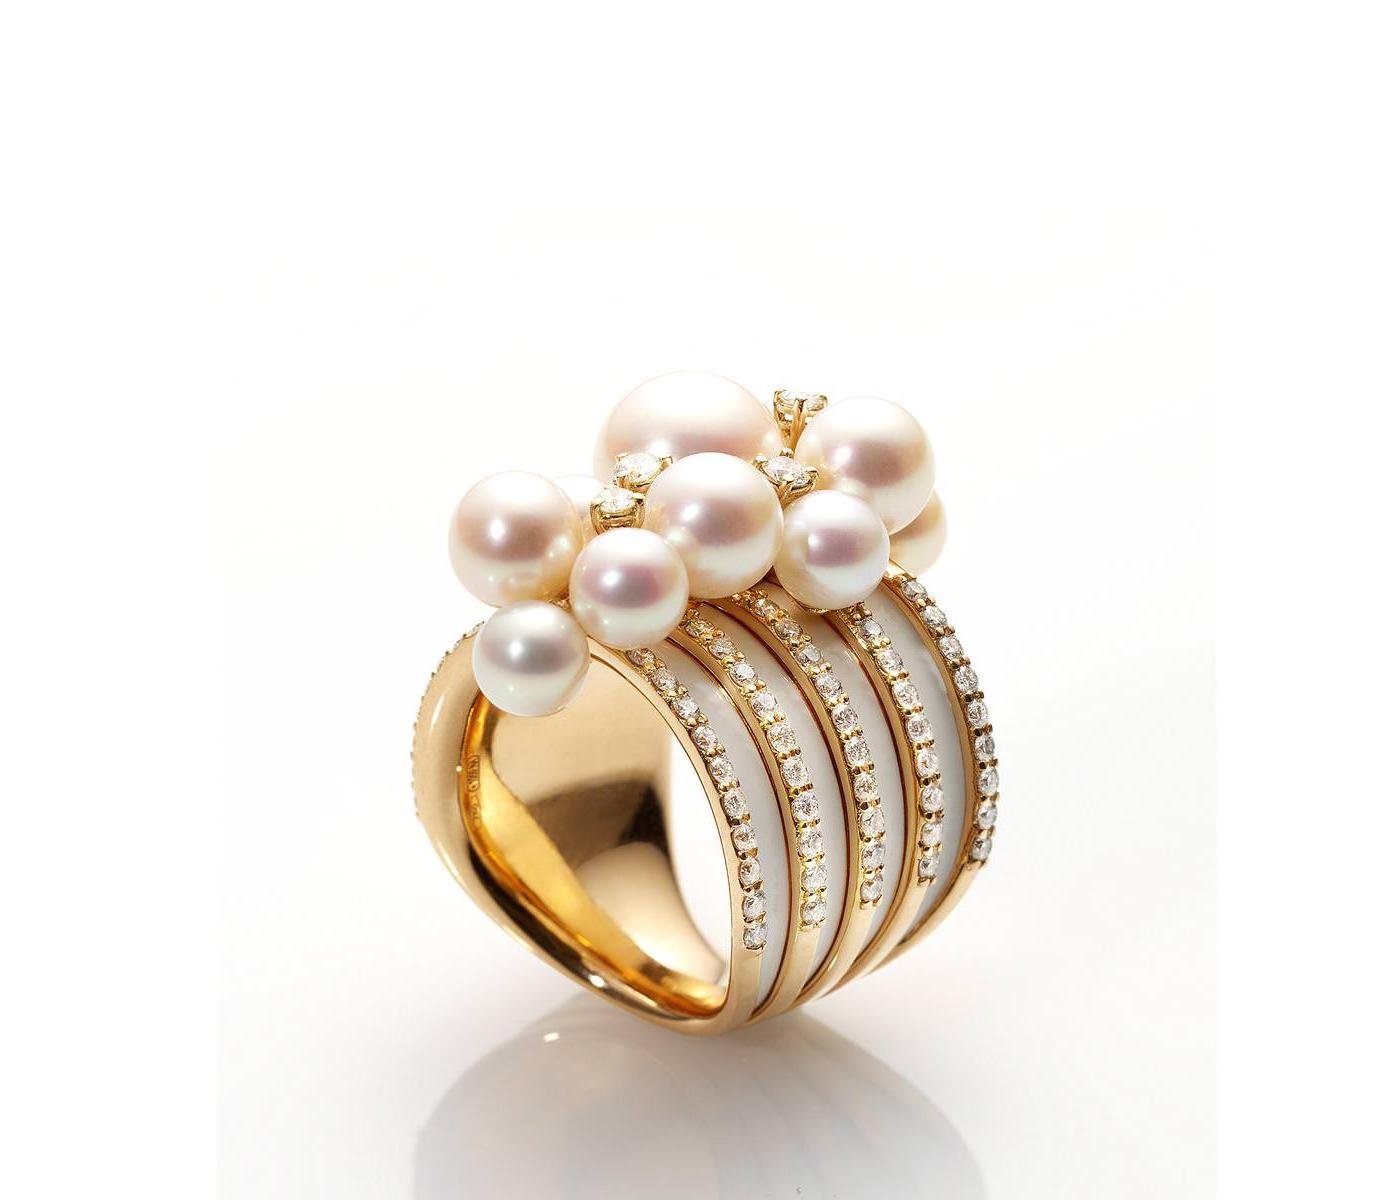 Ring by Chantecler